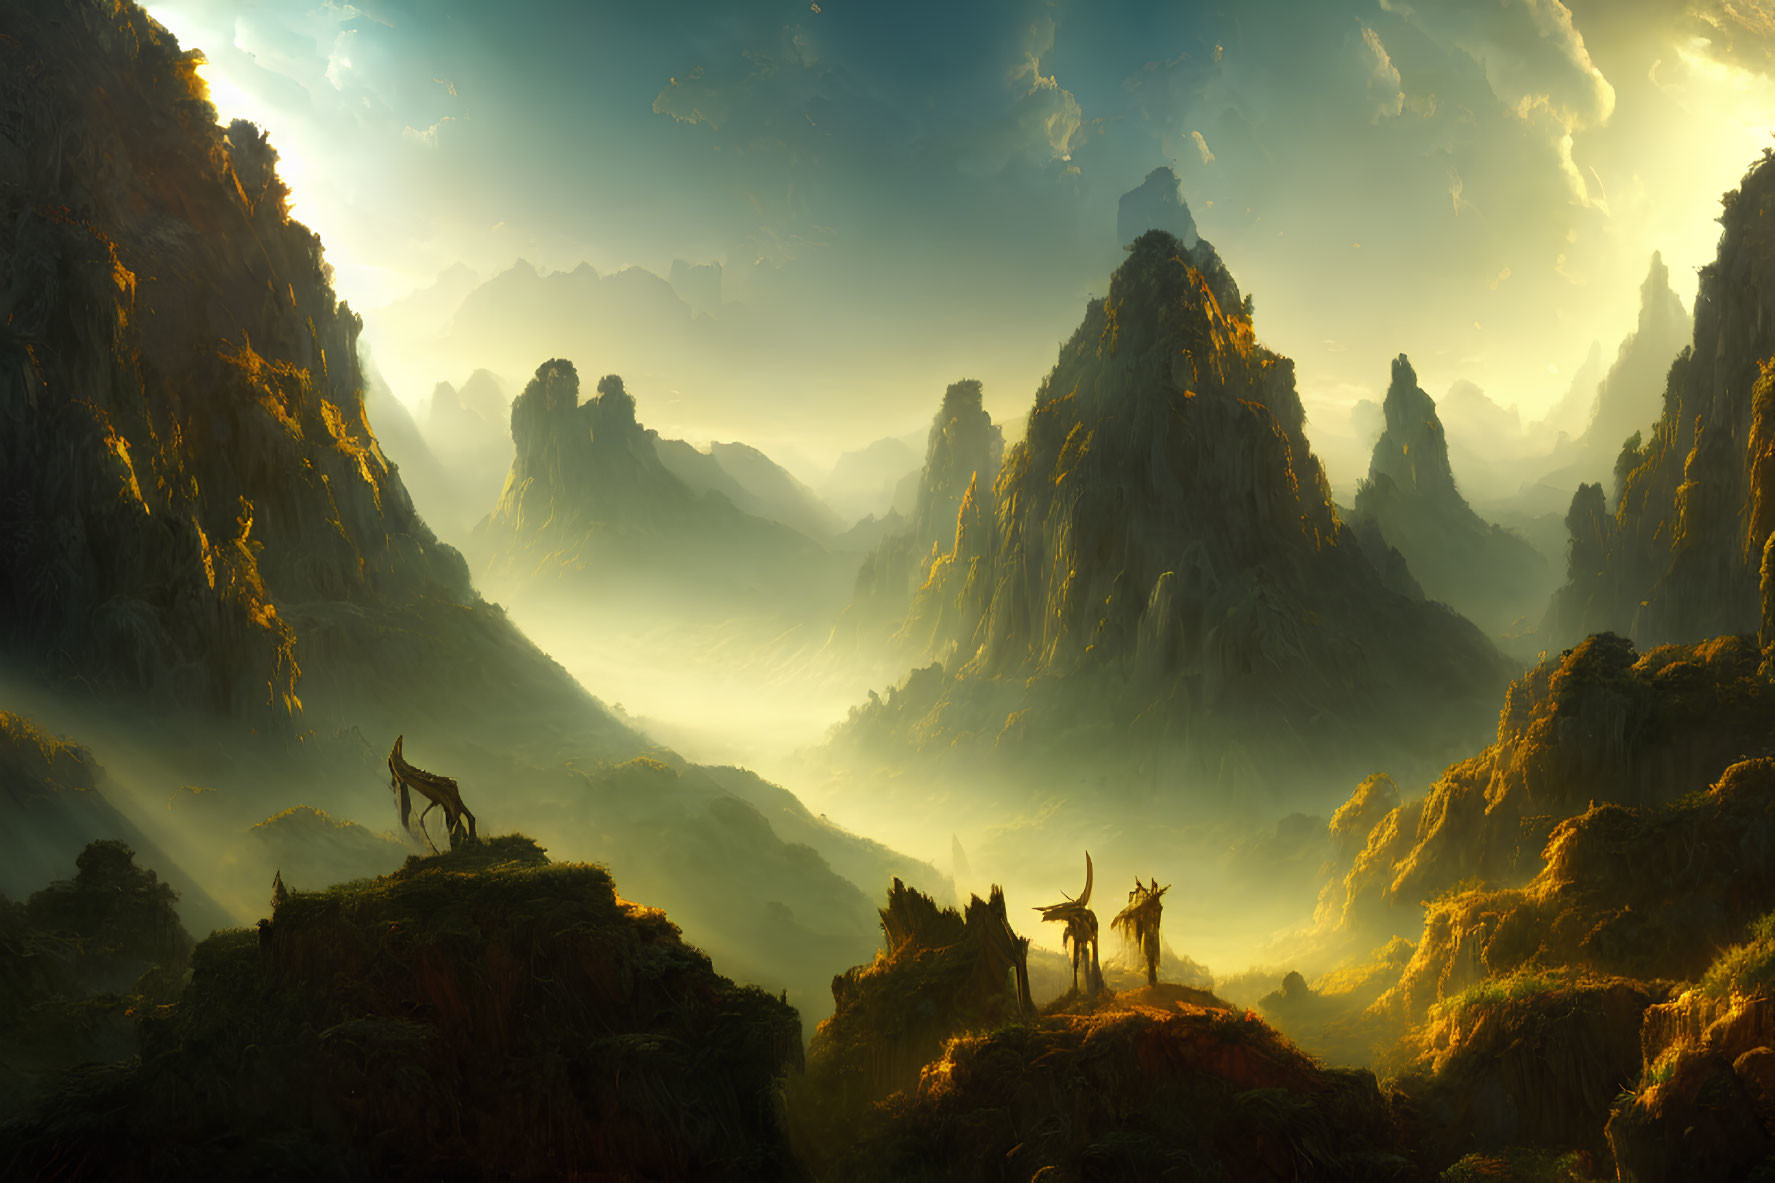 Majestic mountain landscape with deer in golden light